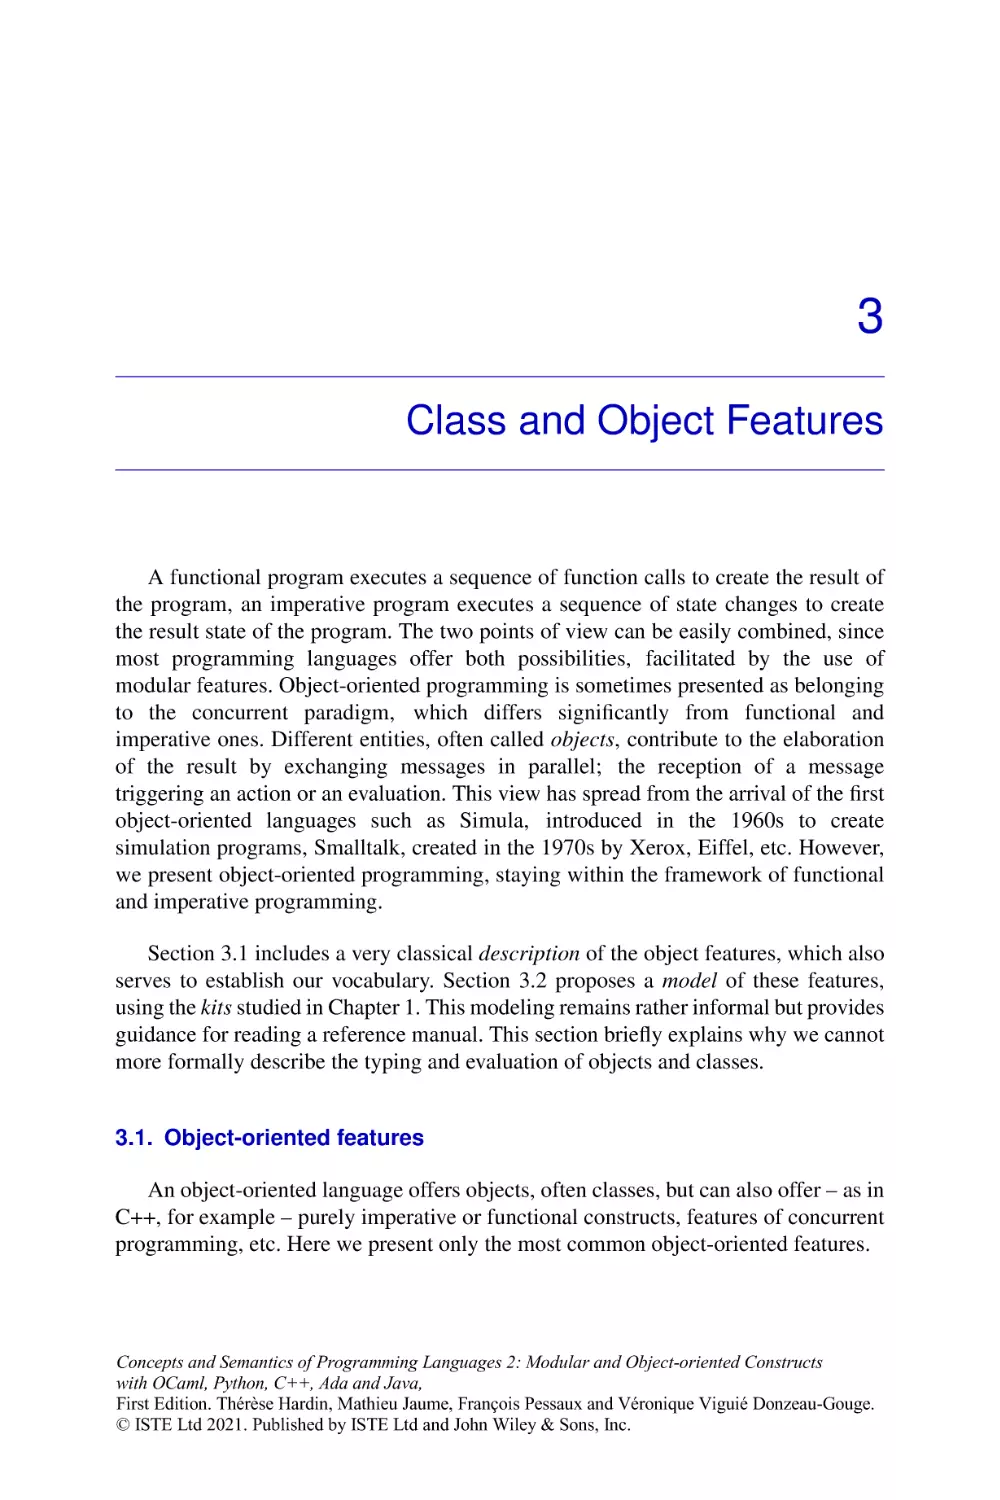 Chapter 3. Class and Object Features
3.1. Object-oriented features